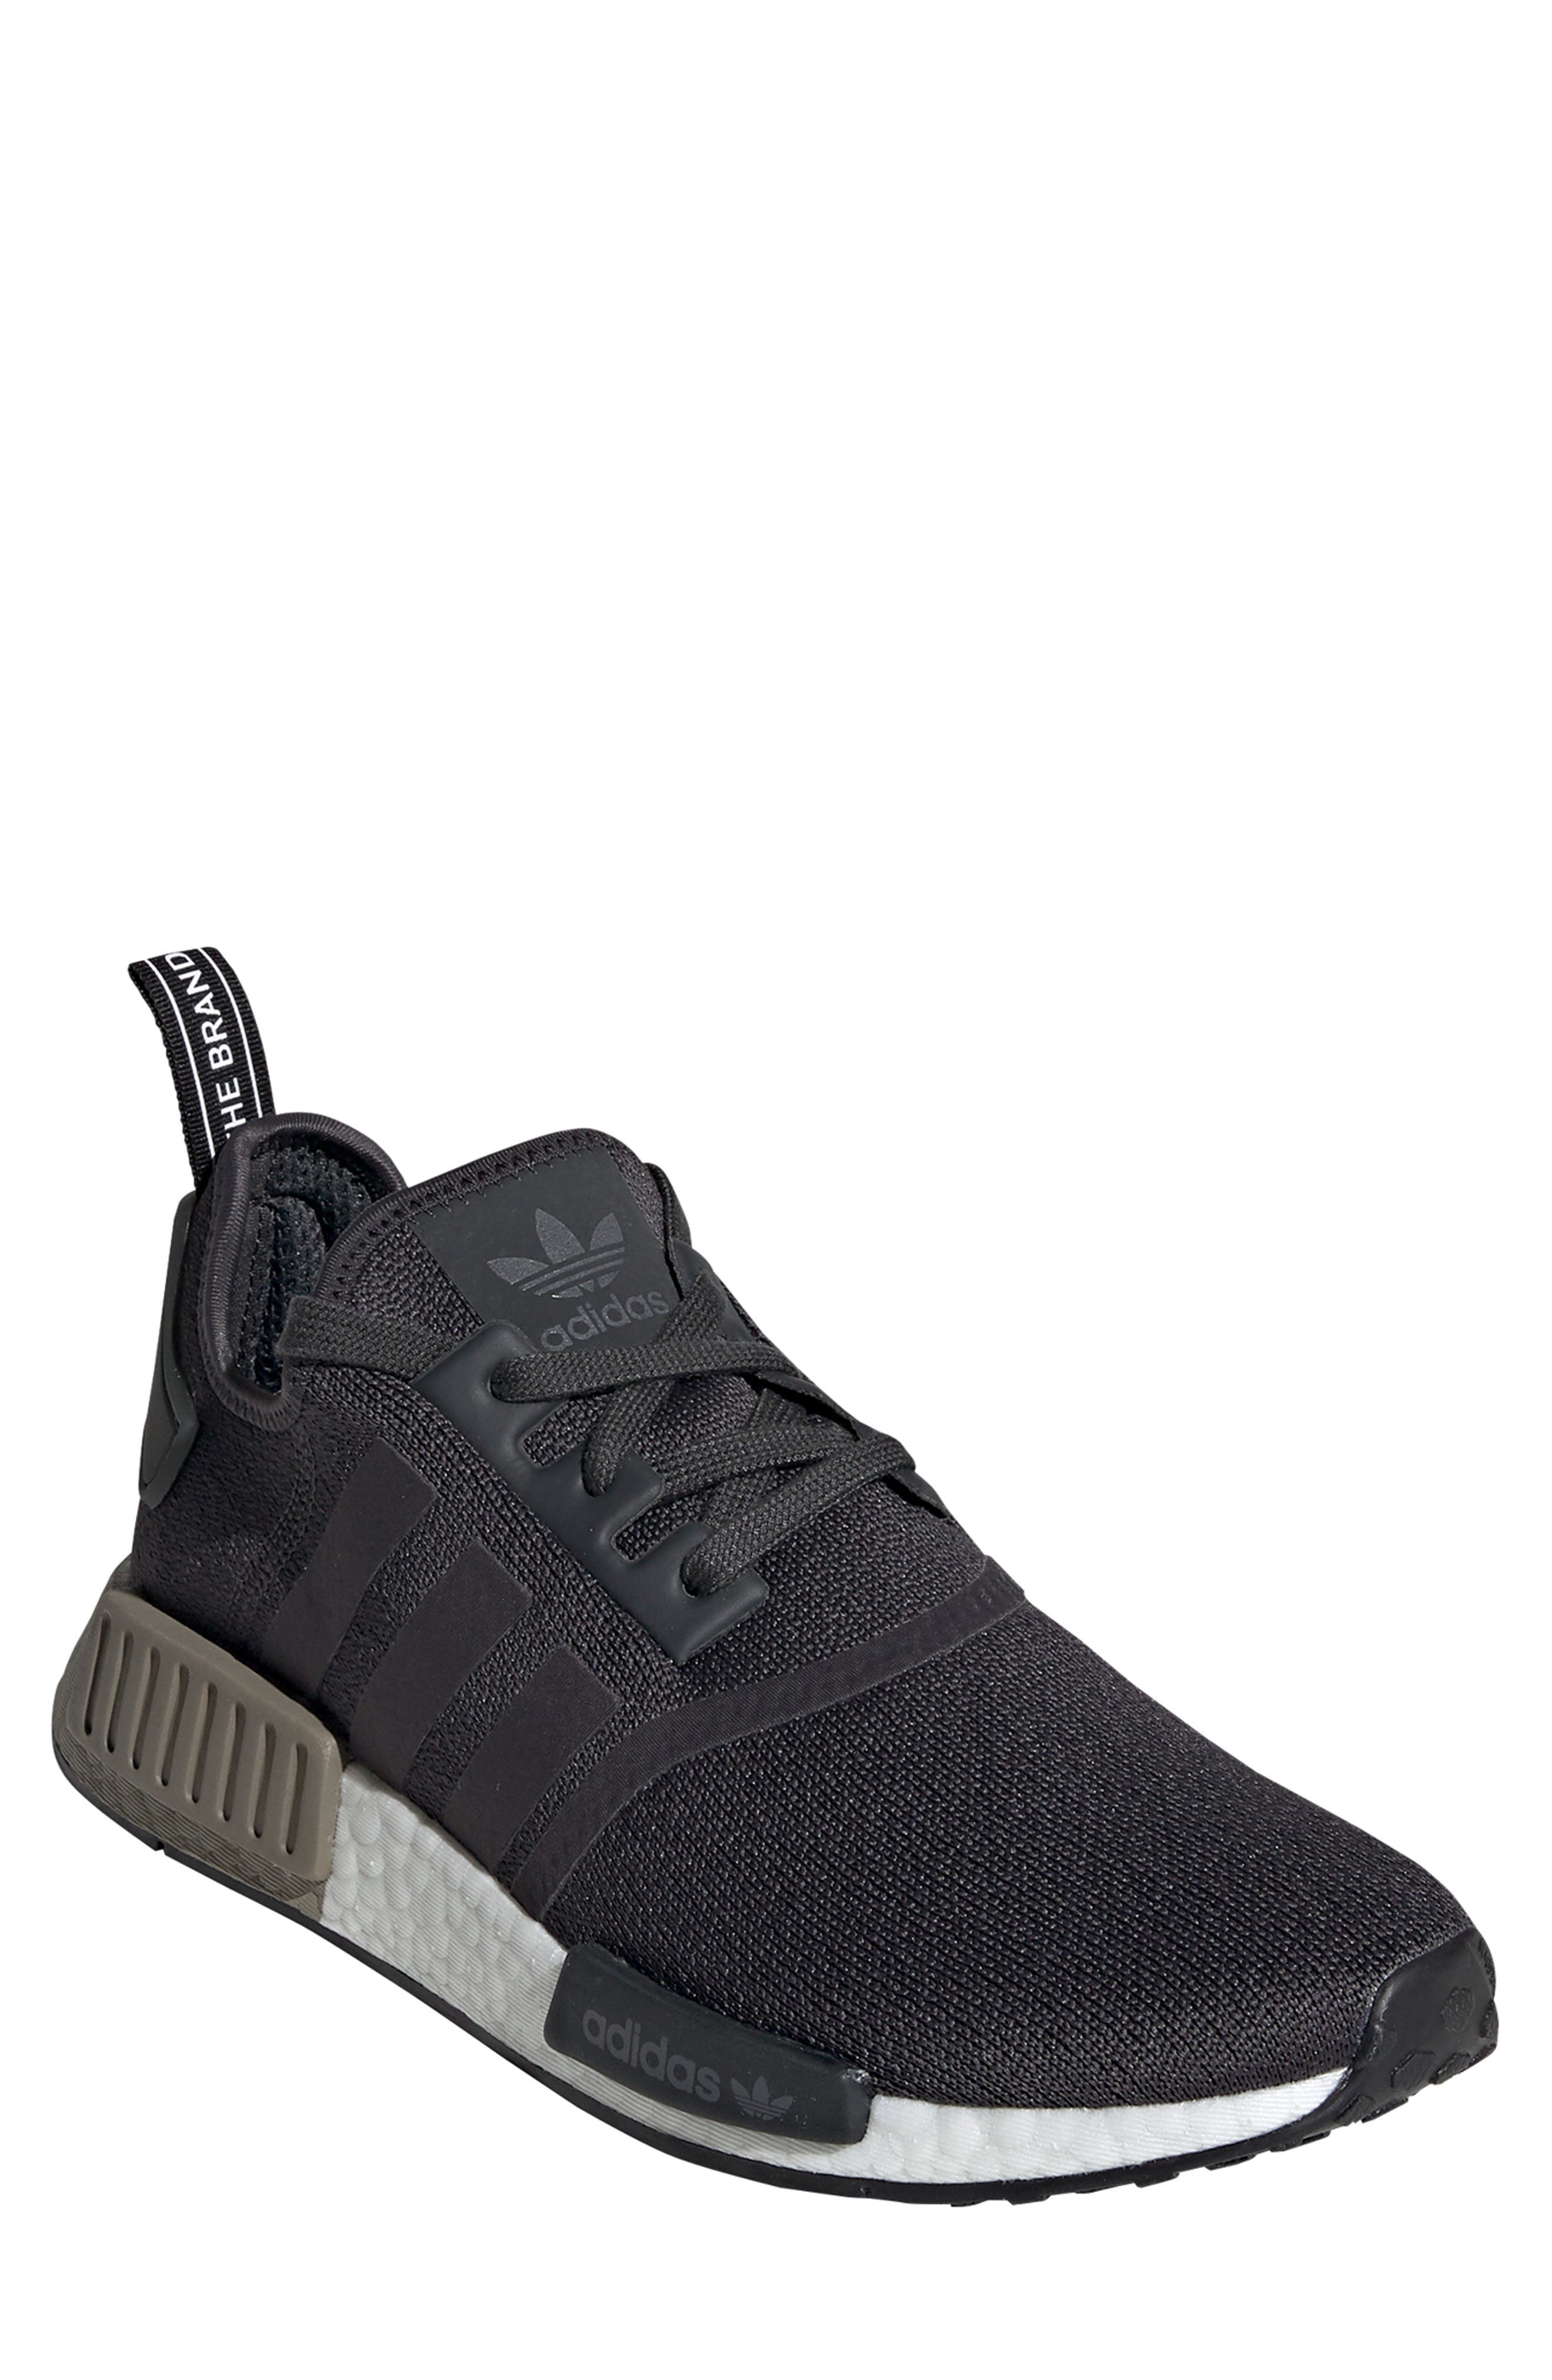 nmd carbon trace cargo